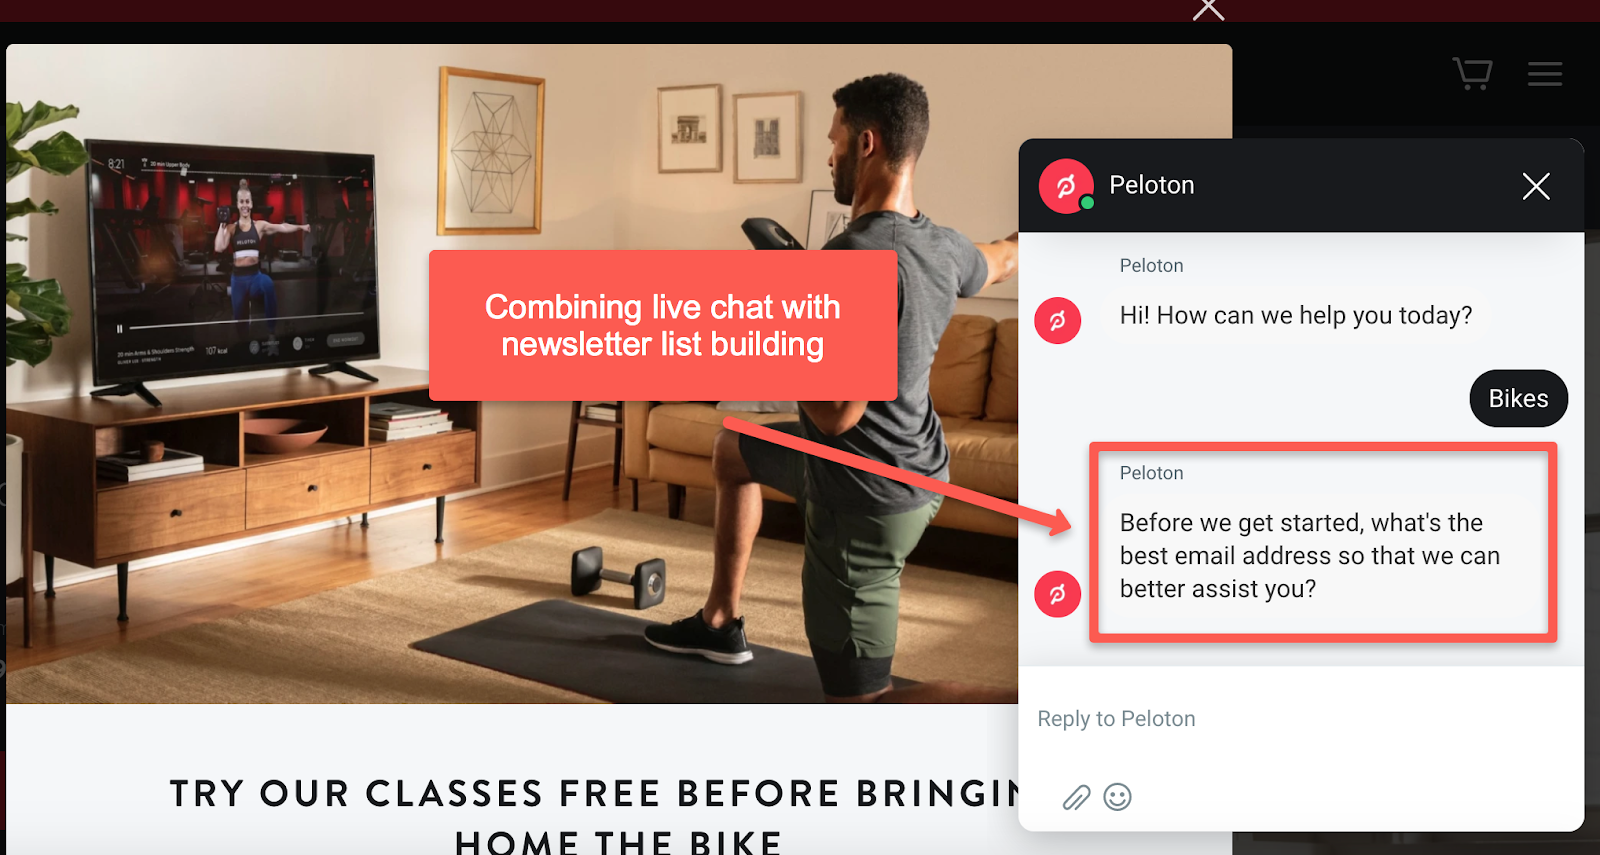 Peloton live chat email address